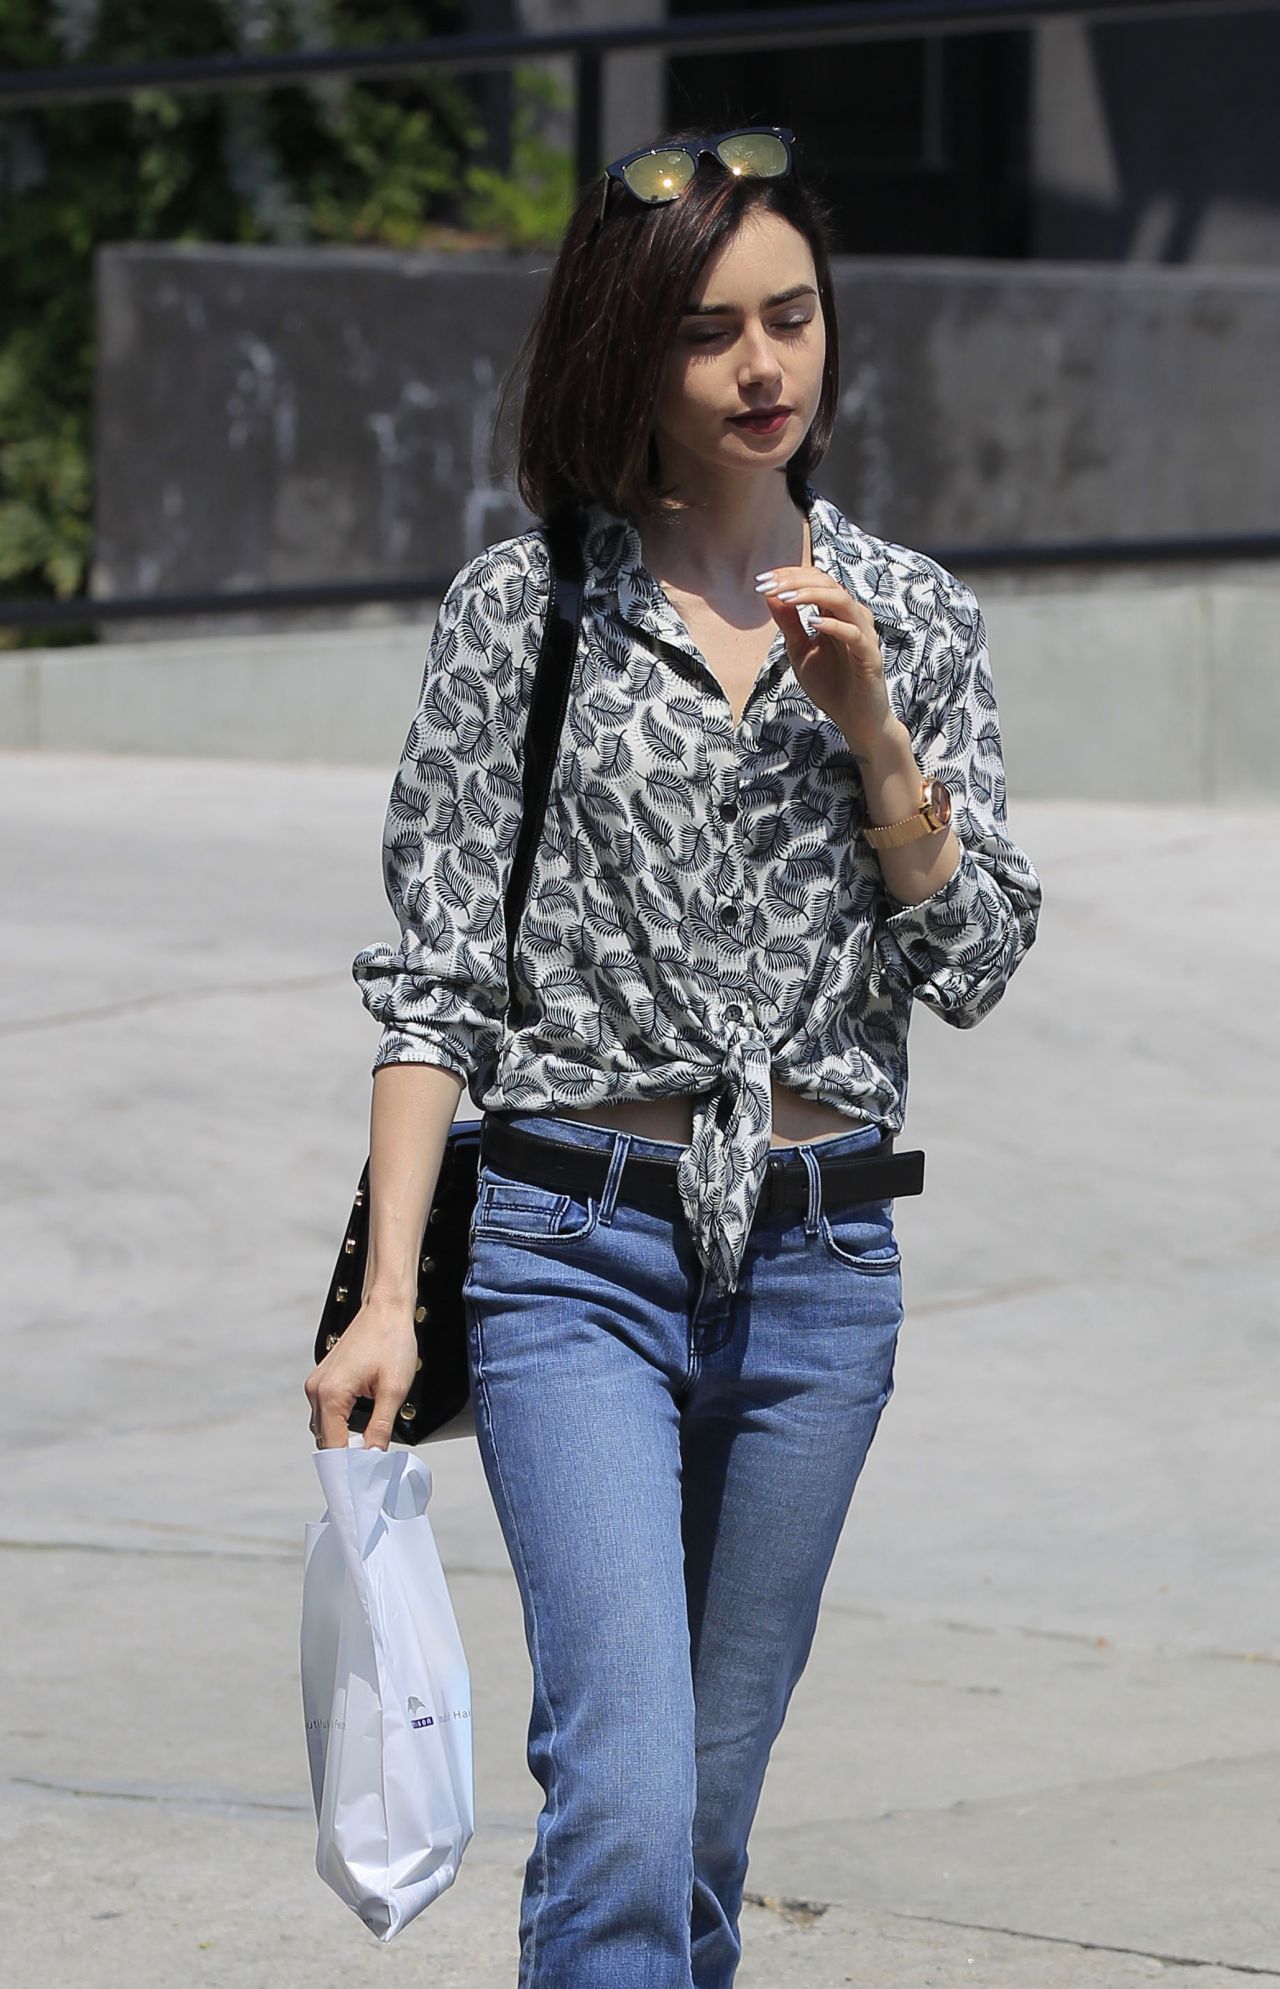 lily-collins-out-in-beverly-hills-8-25-2016-16.jpg